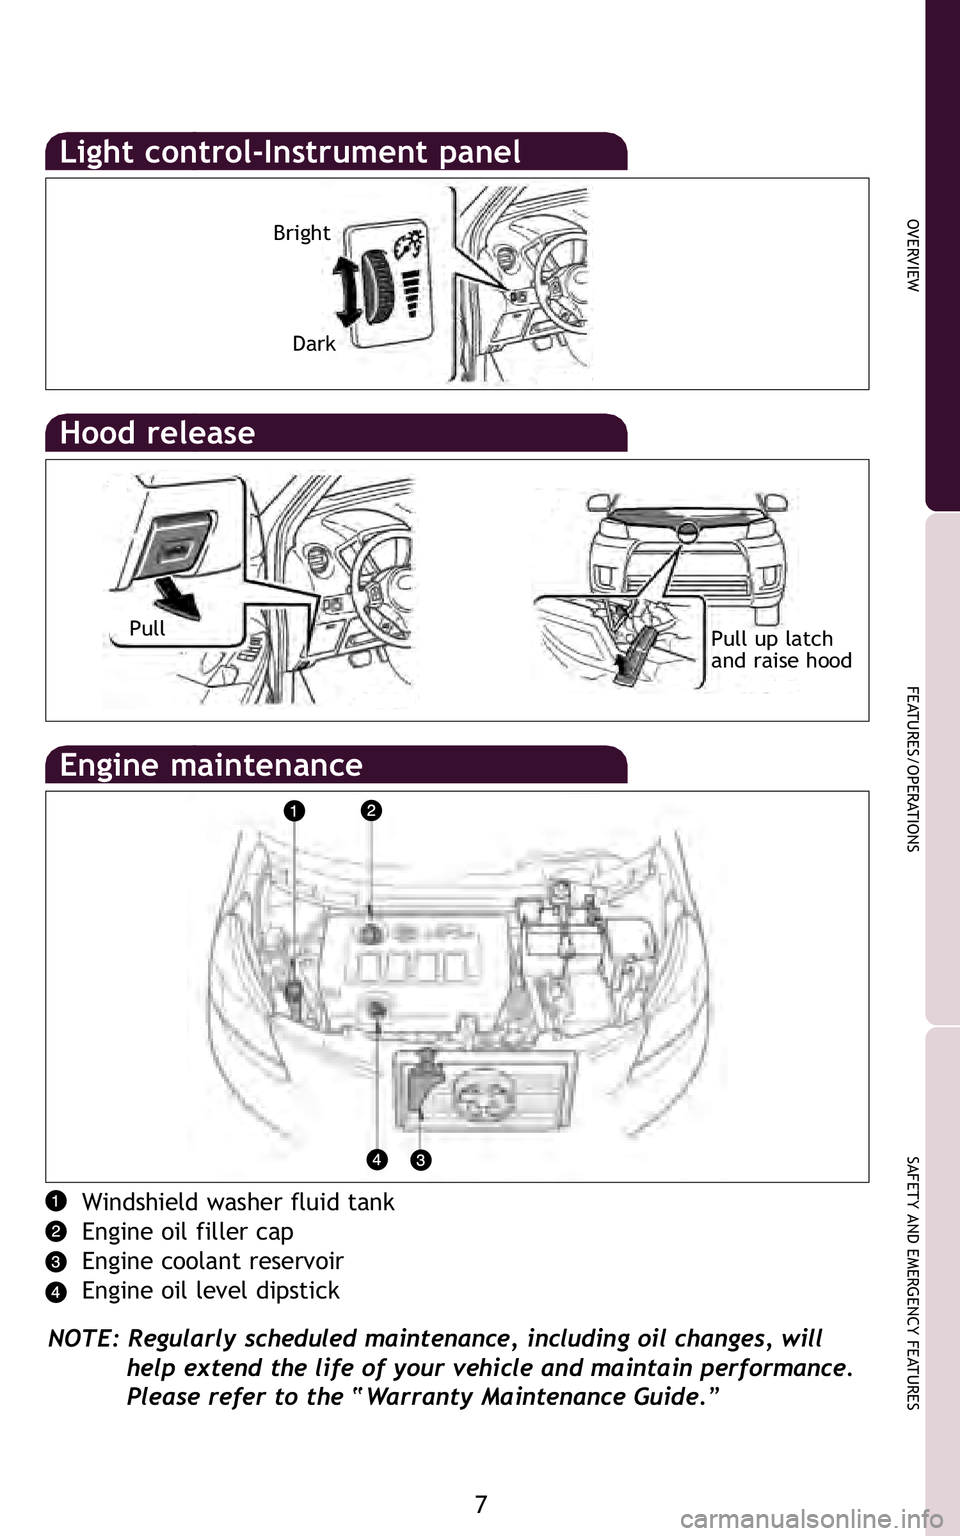 TOYOTA xD 2011  Owners Manual (in English) 7
OVERVIEW
FEATURES/OPERATIONS
SAFETY AND EMERGENCY FEATURESrn to
open
all
ugh,
Pull Pull up latch
and raise hood
Windshield washer fluid tank
Engine oil filler cap
Engine coolant reservoir
Engine oil